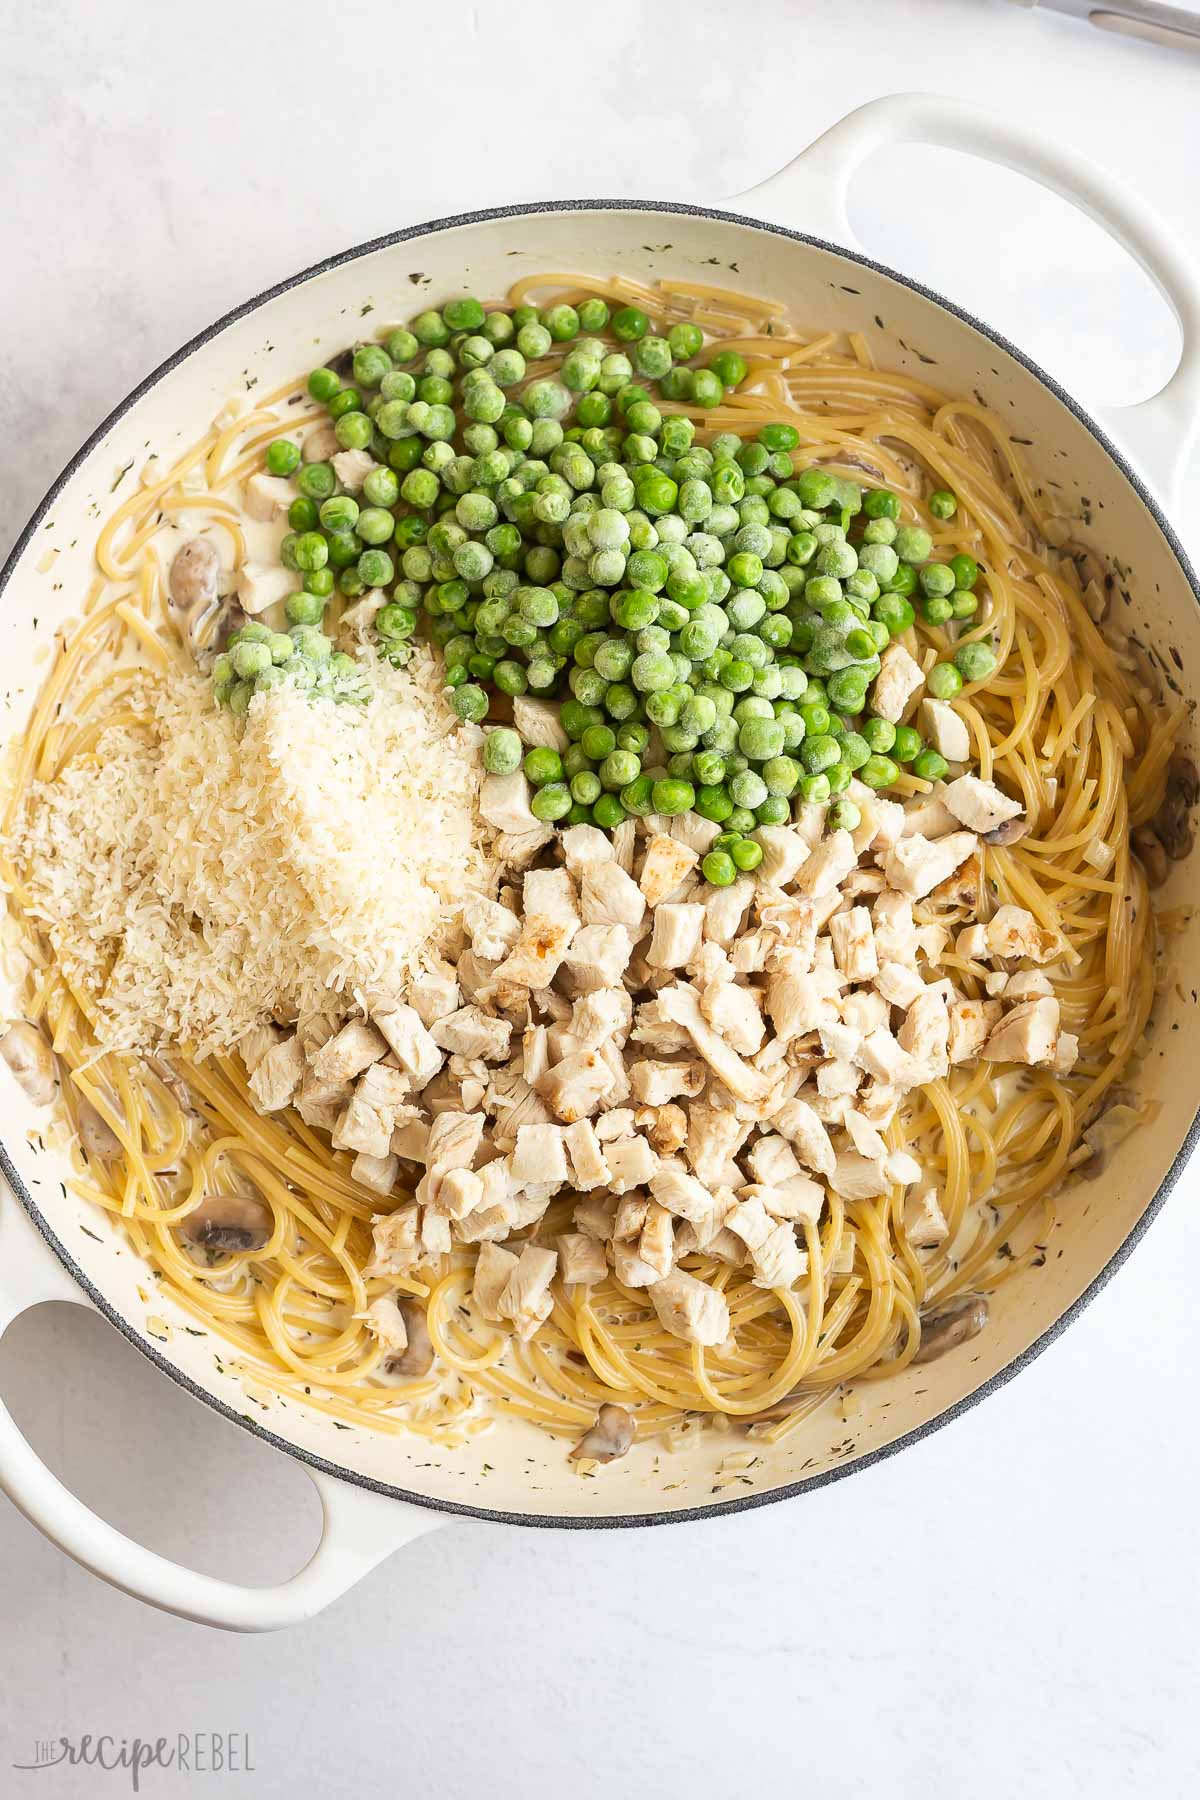 peas parmesan and cooked turkey added to tetrazzini in white pan.